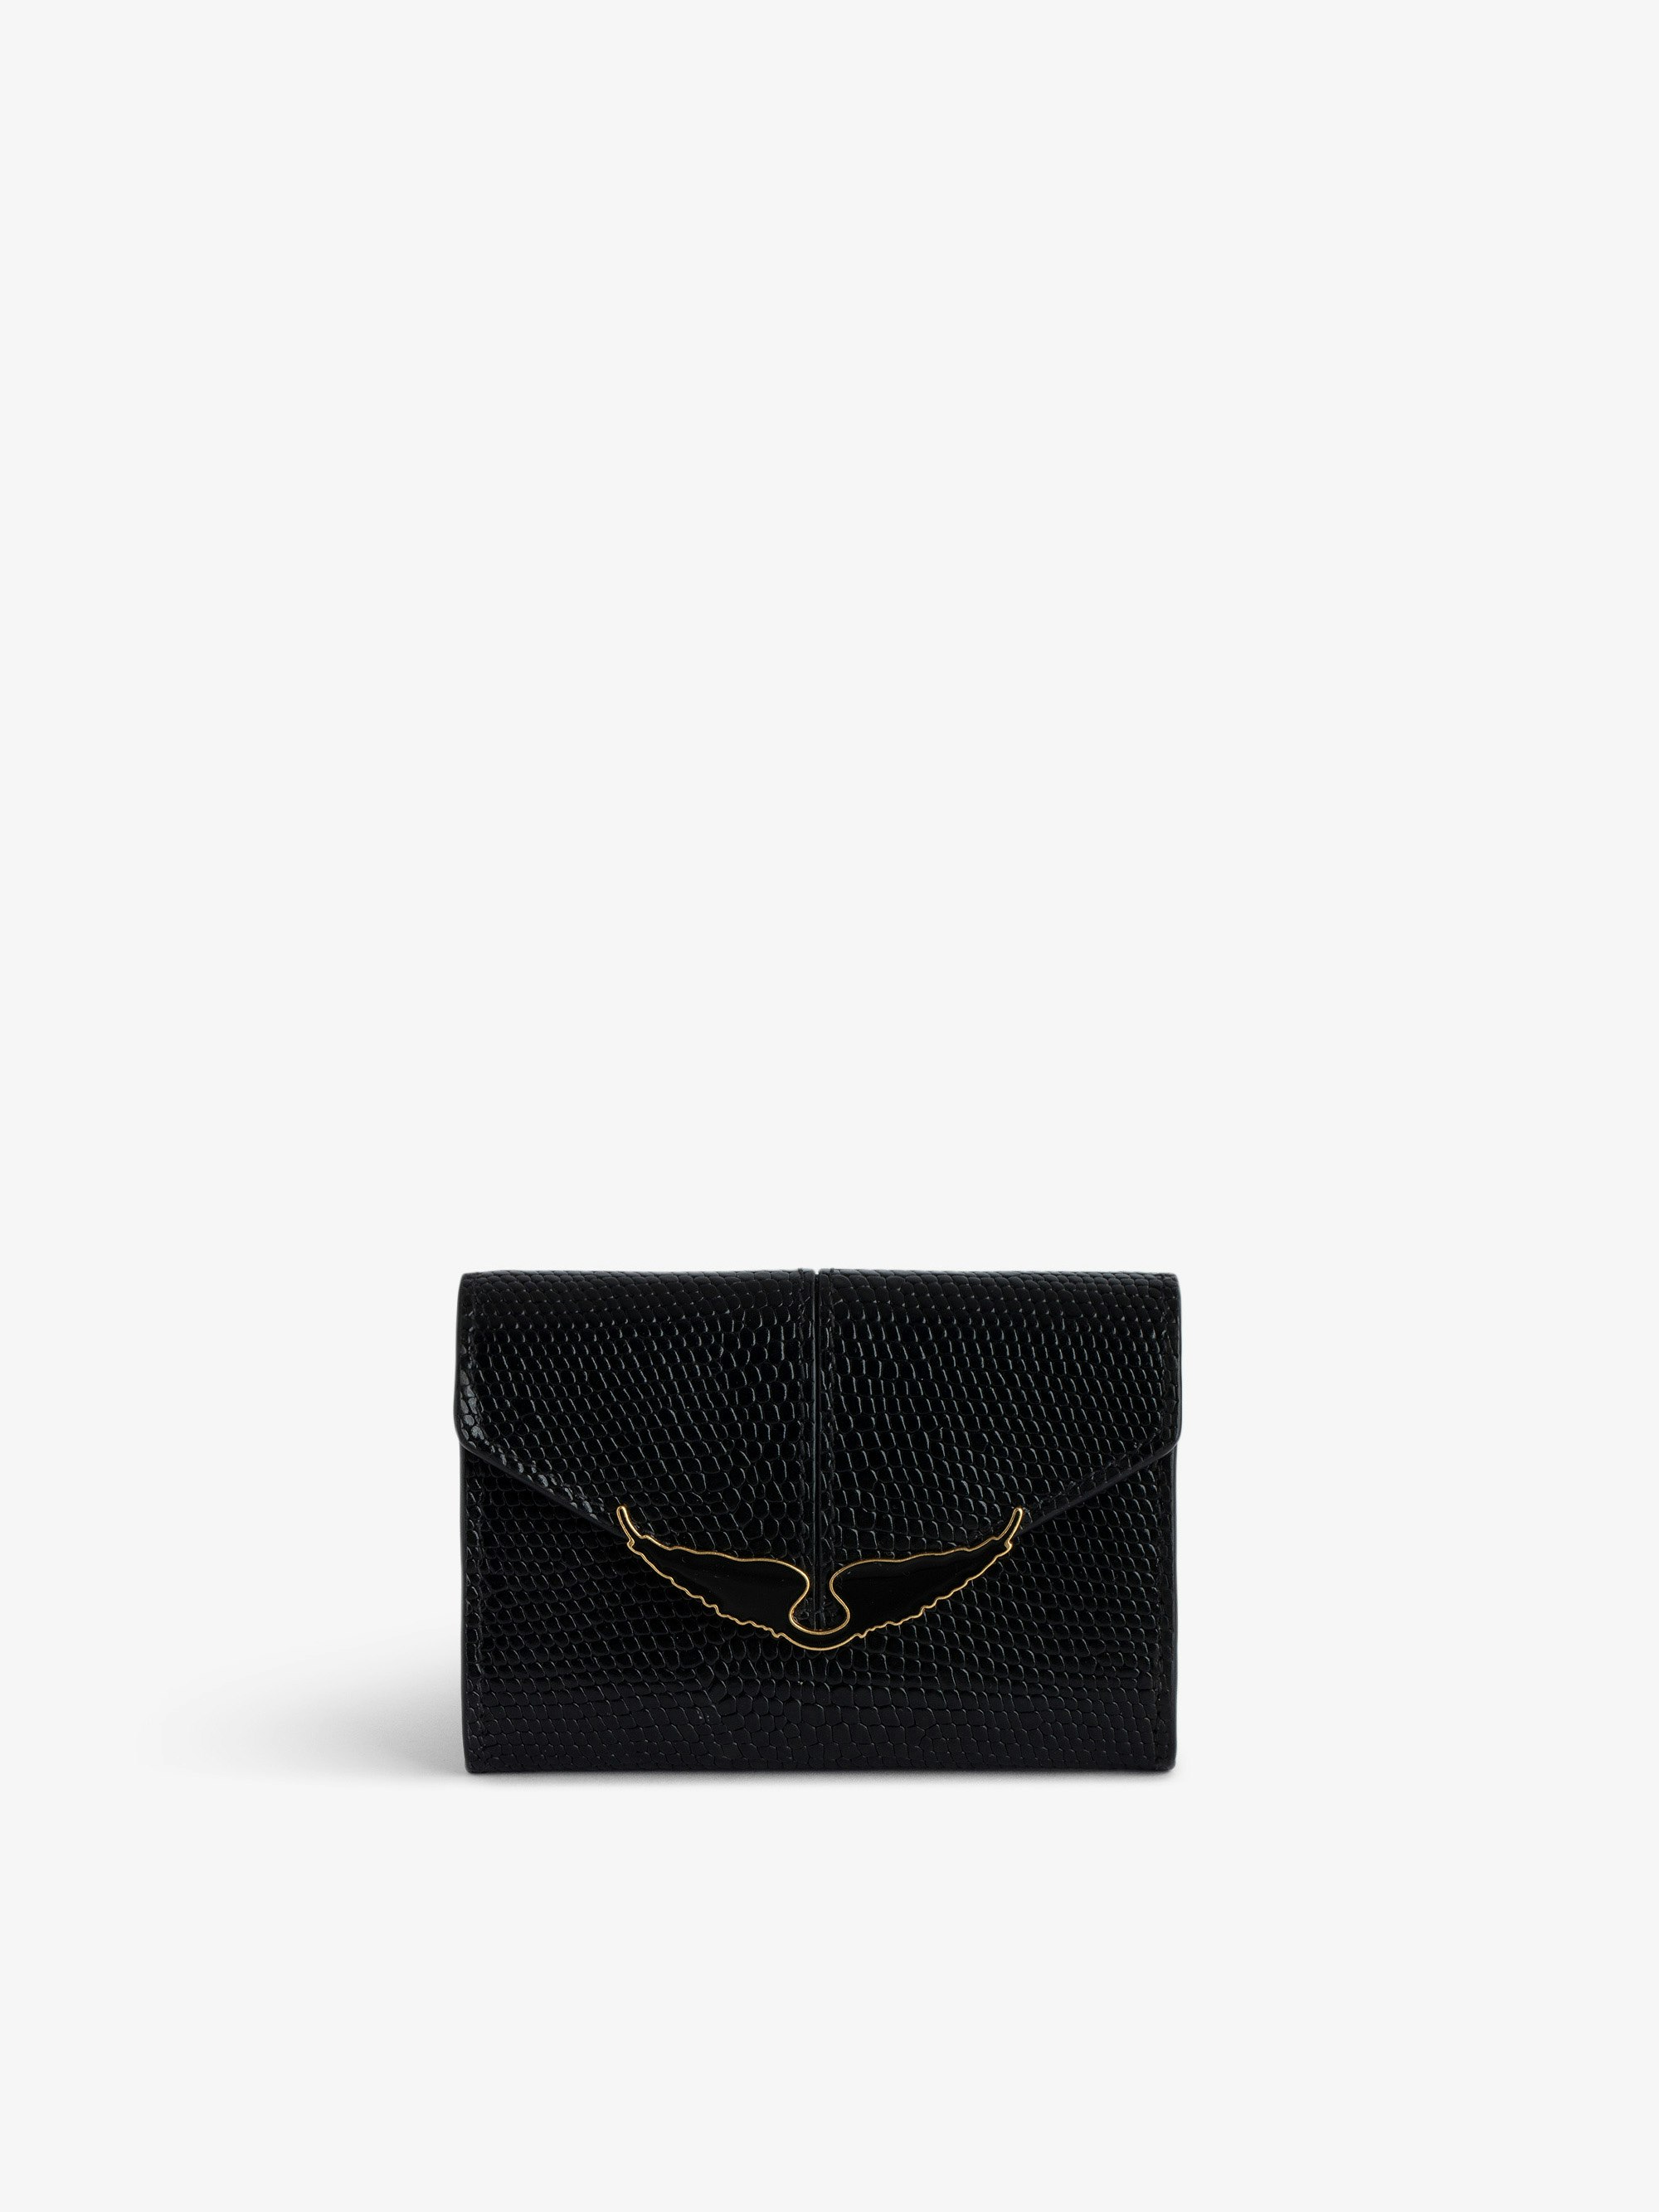 Borderline Embossed Wallet - Small black iguana-embossed leather wallet with flap.